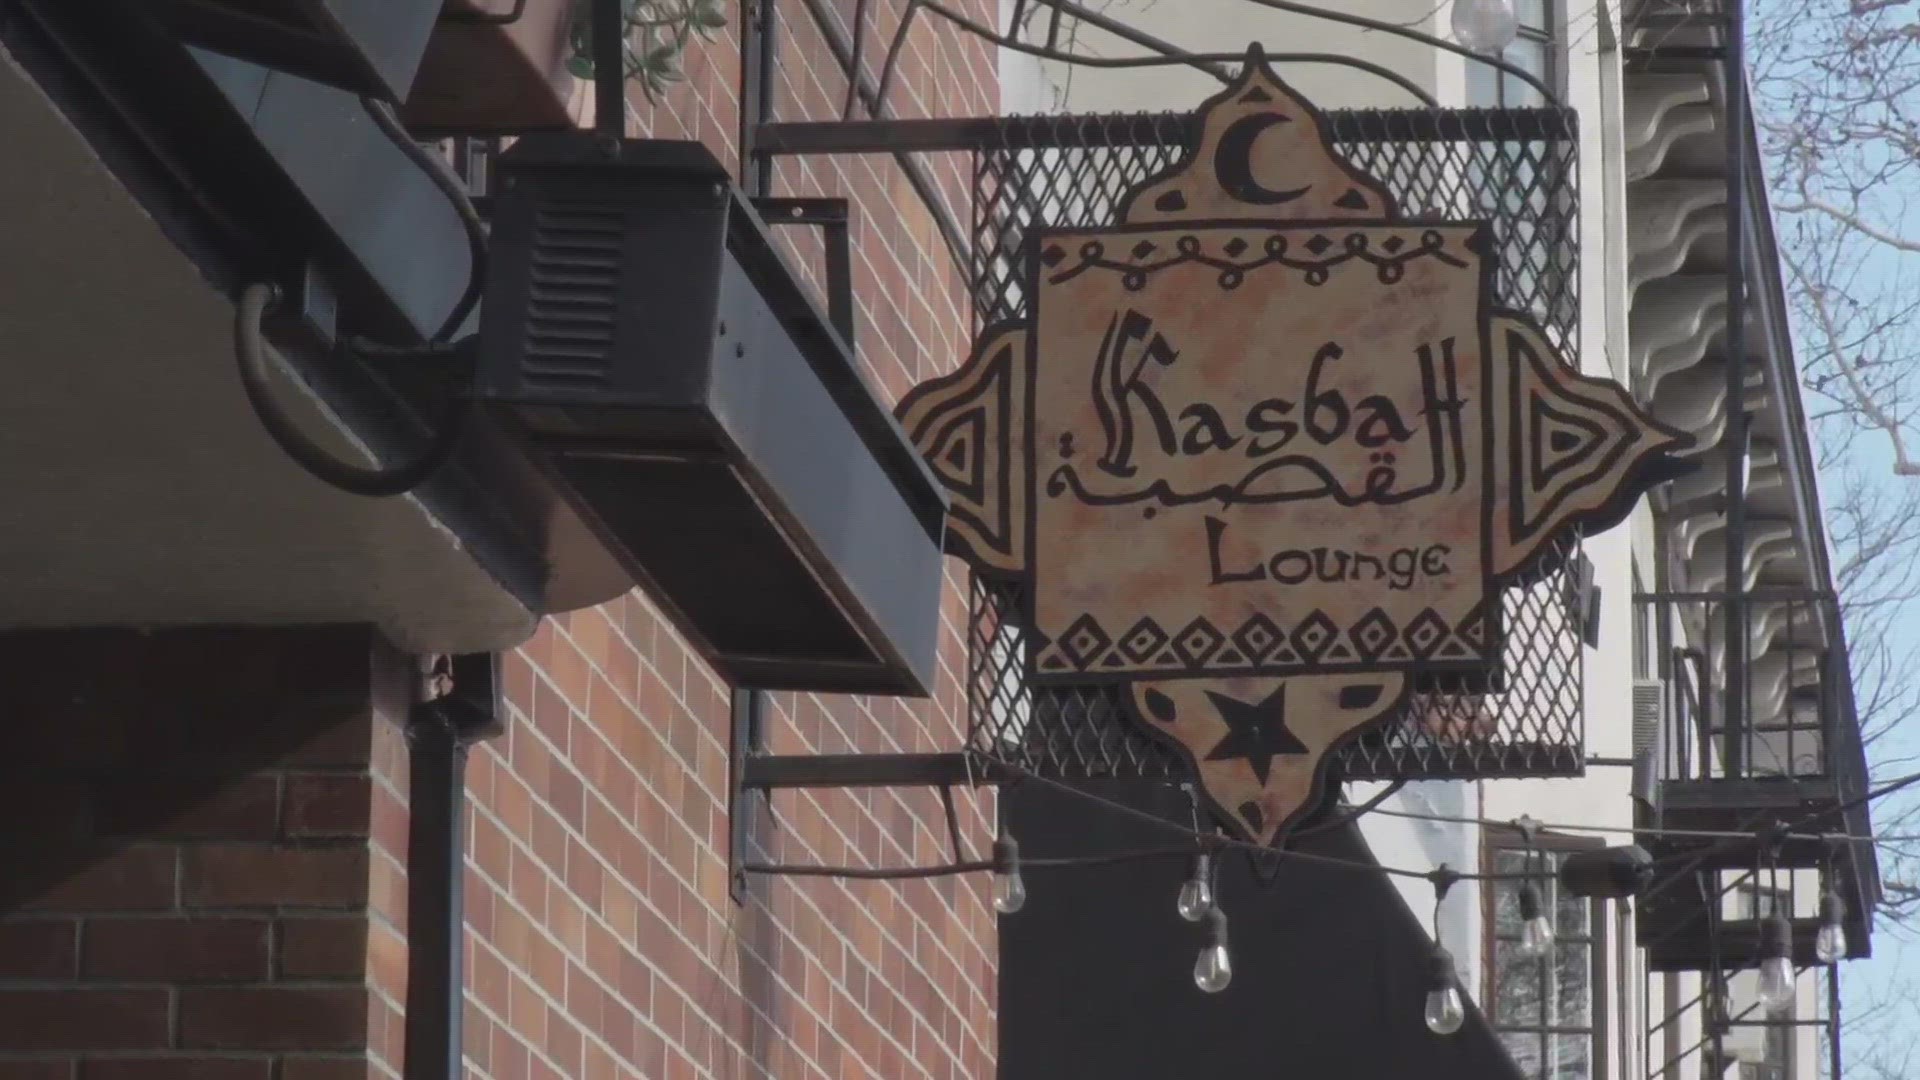 The Middle Eastern lounge and restaurant on J Street was devastated by fire